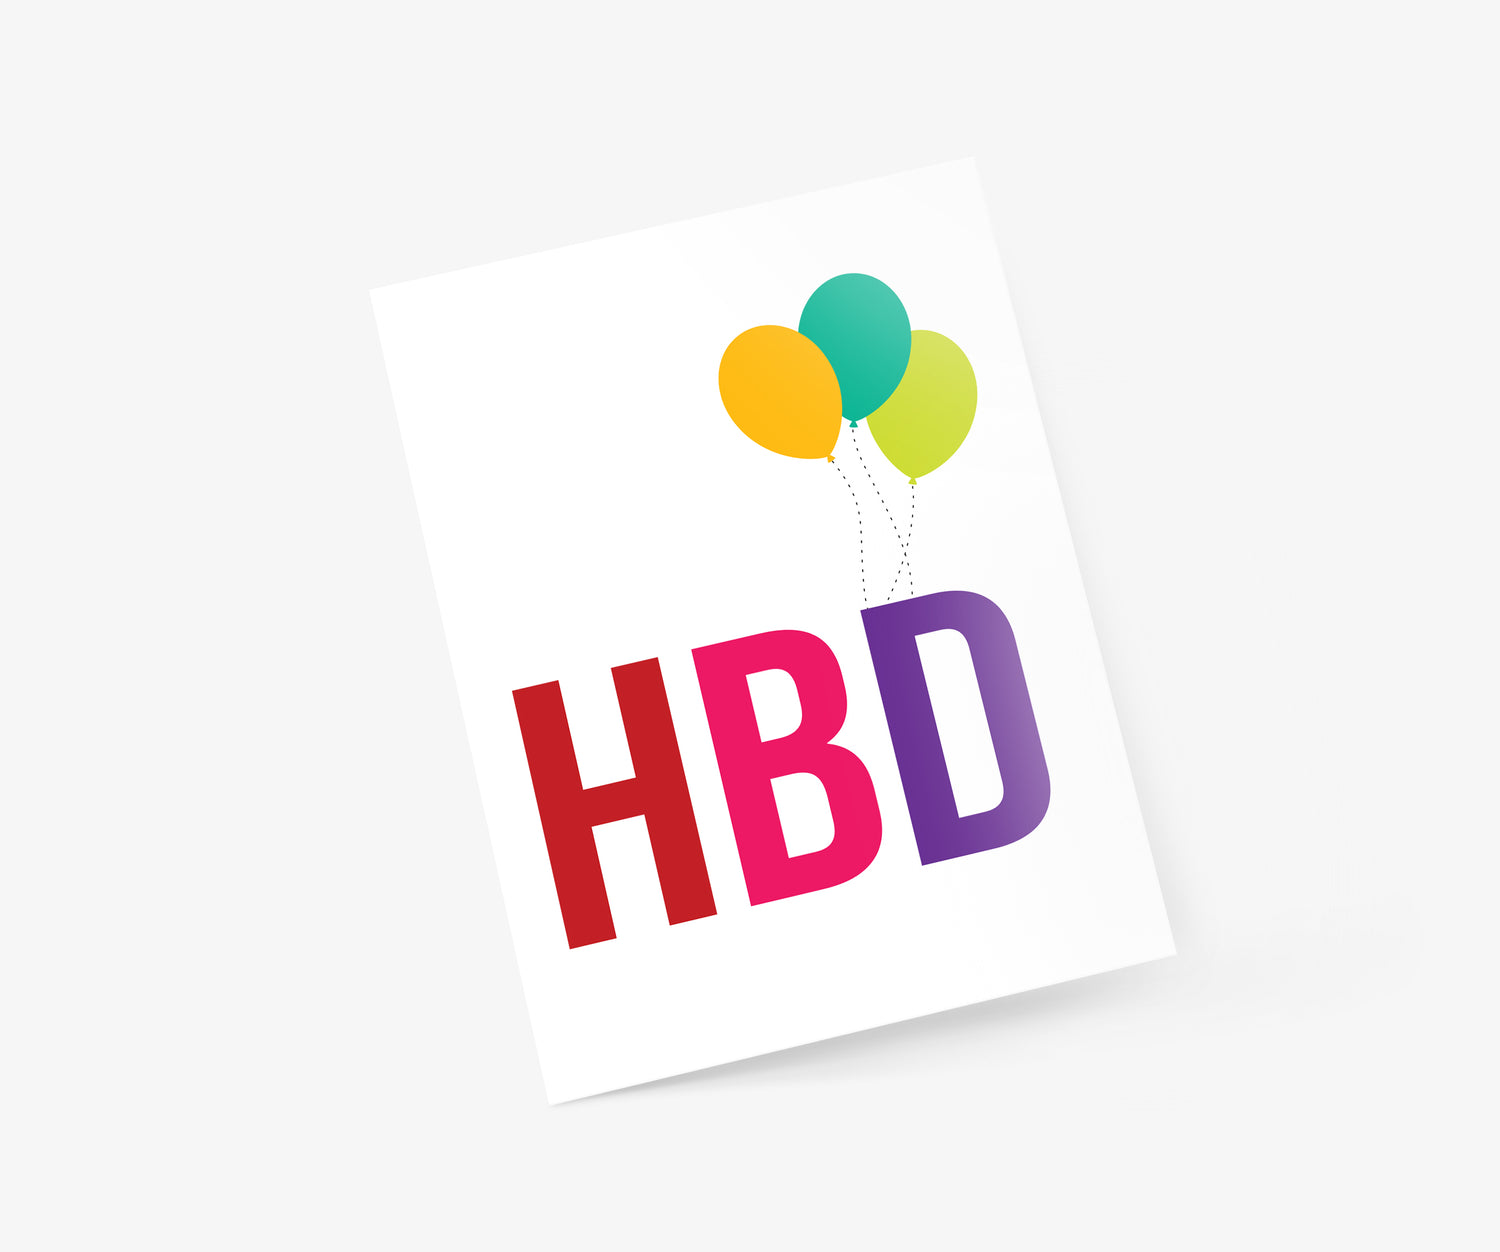 HBD Birthday Card | Footnotes Paper